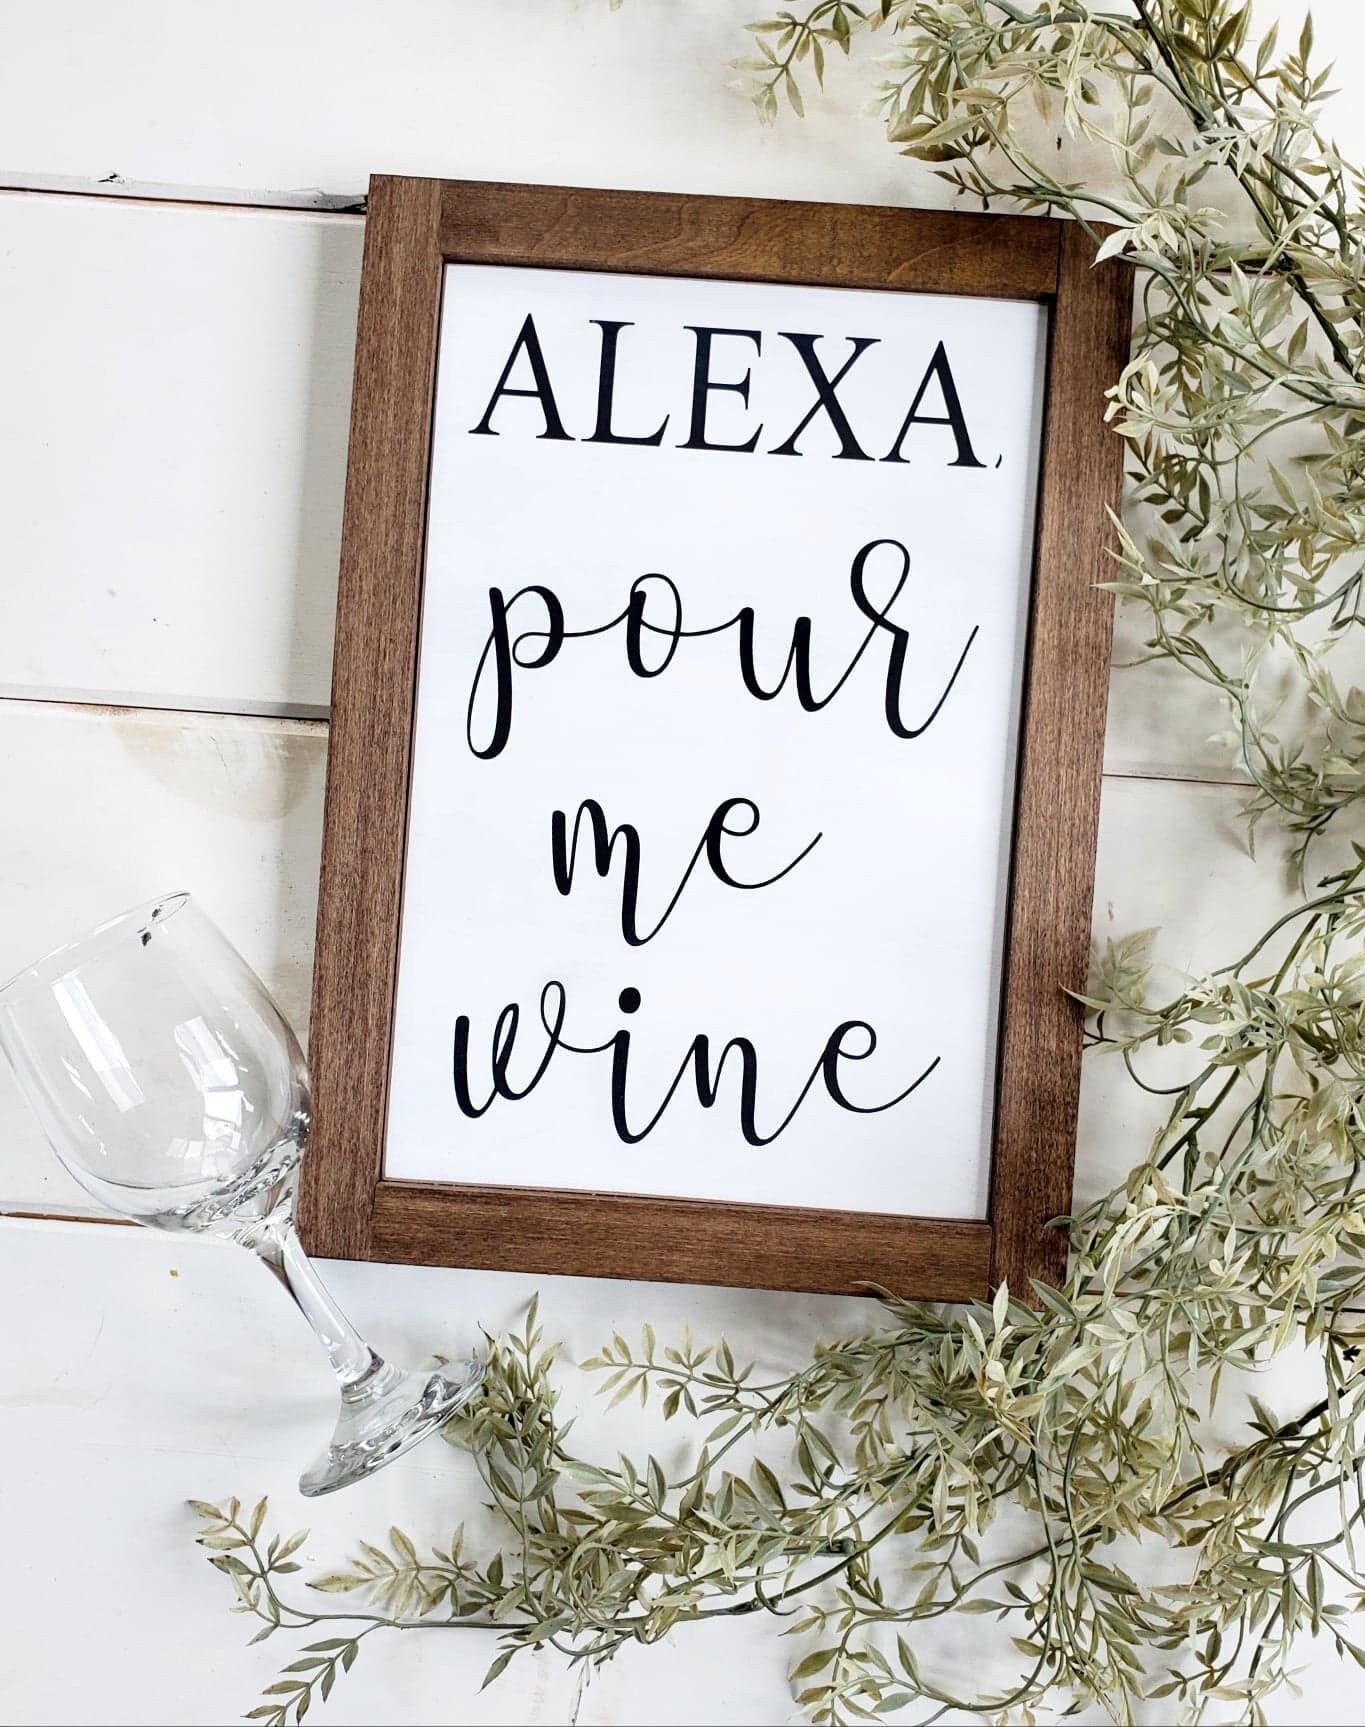 Alexa pour me wine, Alexa sign, wine sing, funny wine sign, drinking sign,